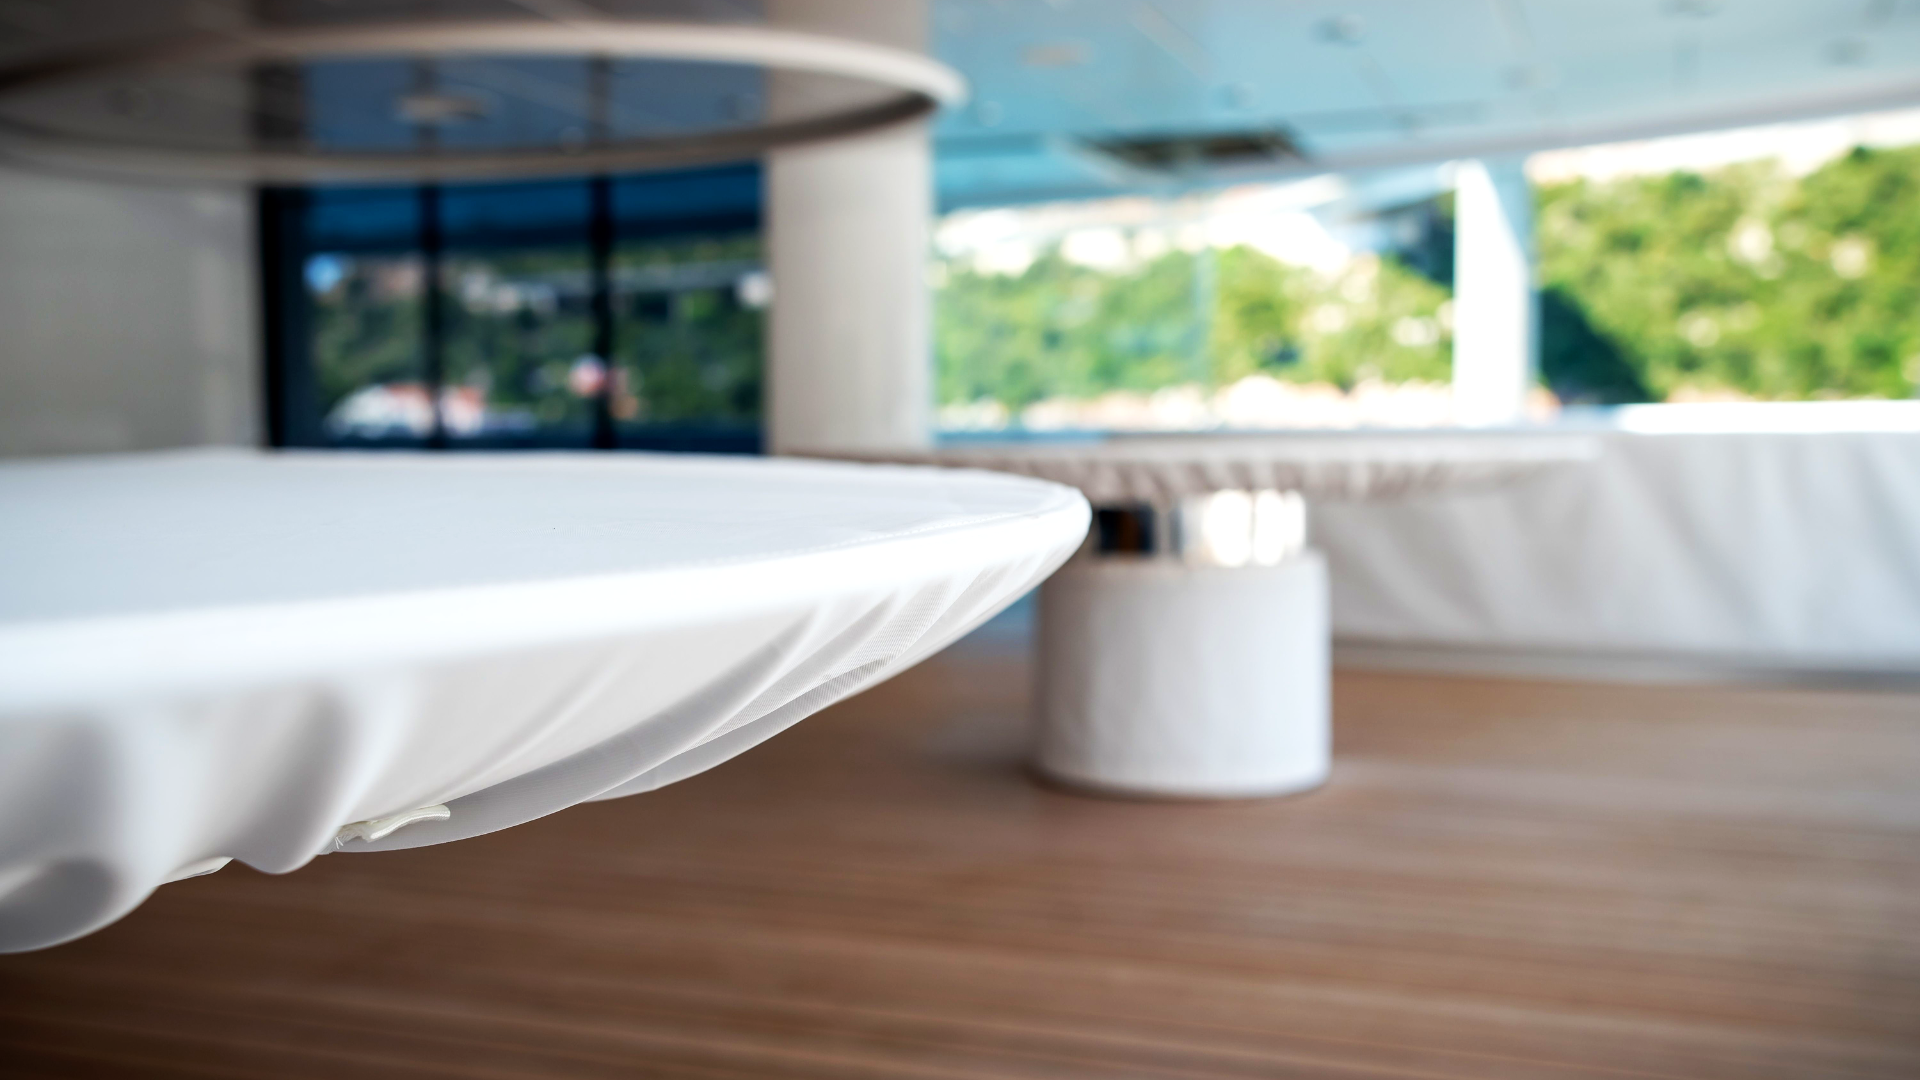 Keeping superyacht deck furniture safe from sun, rain and wind with durable water-repellant, easy to clean protective covers.